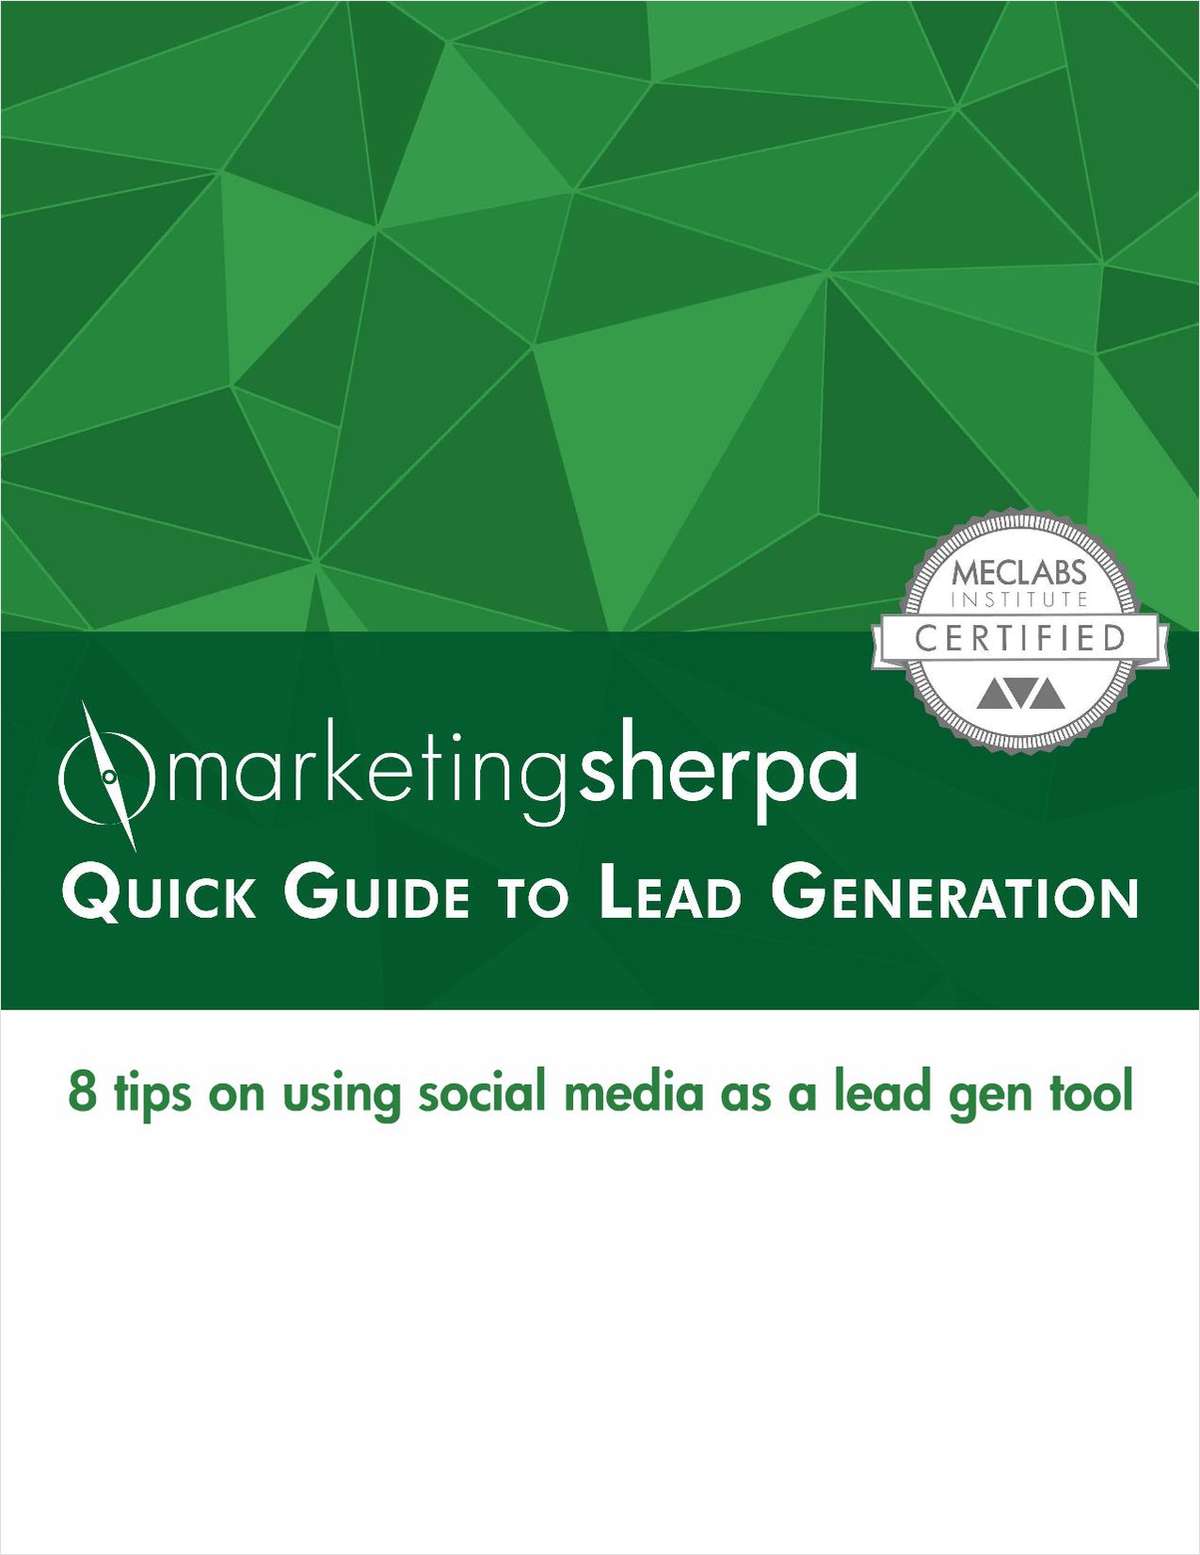 Quick Guide to Lead Generation